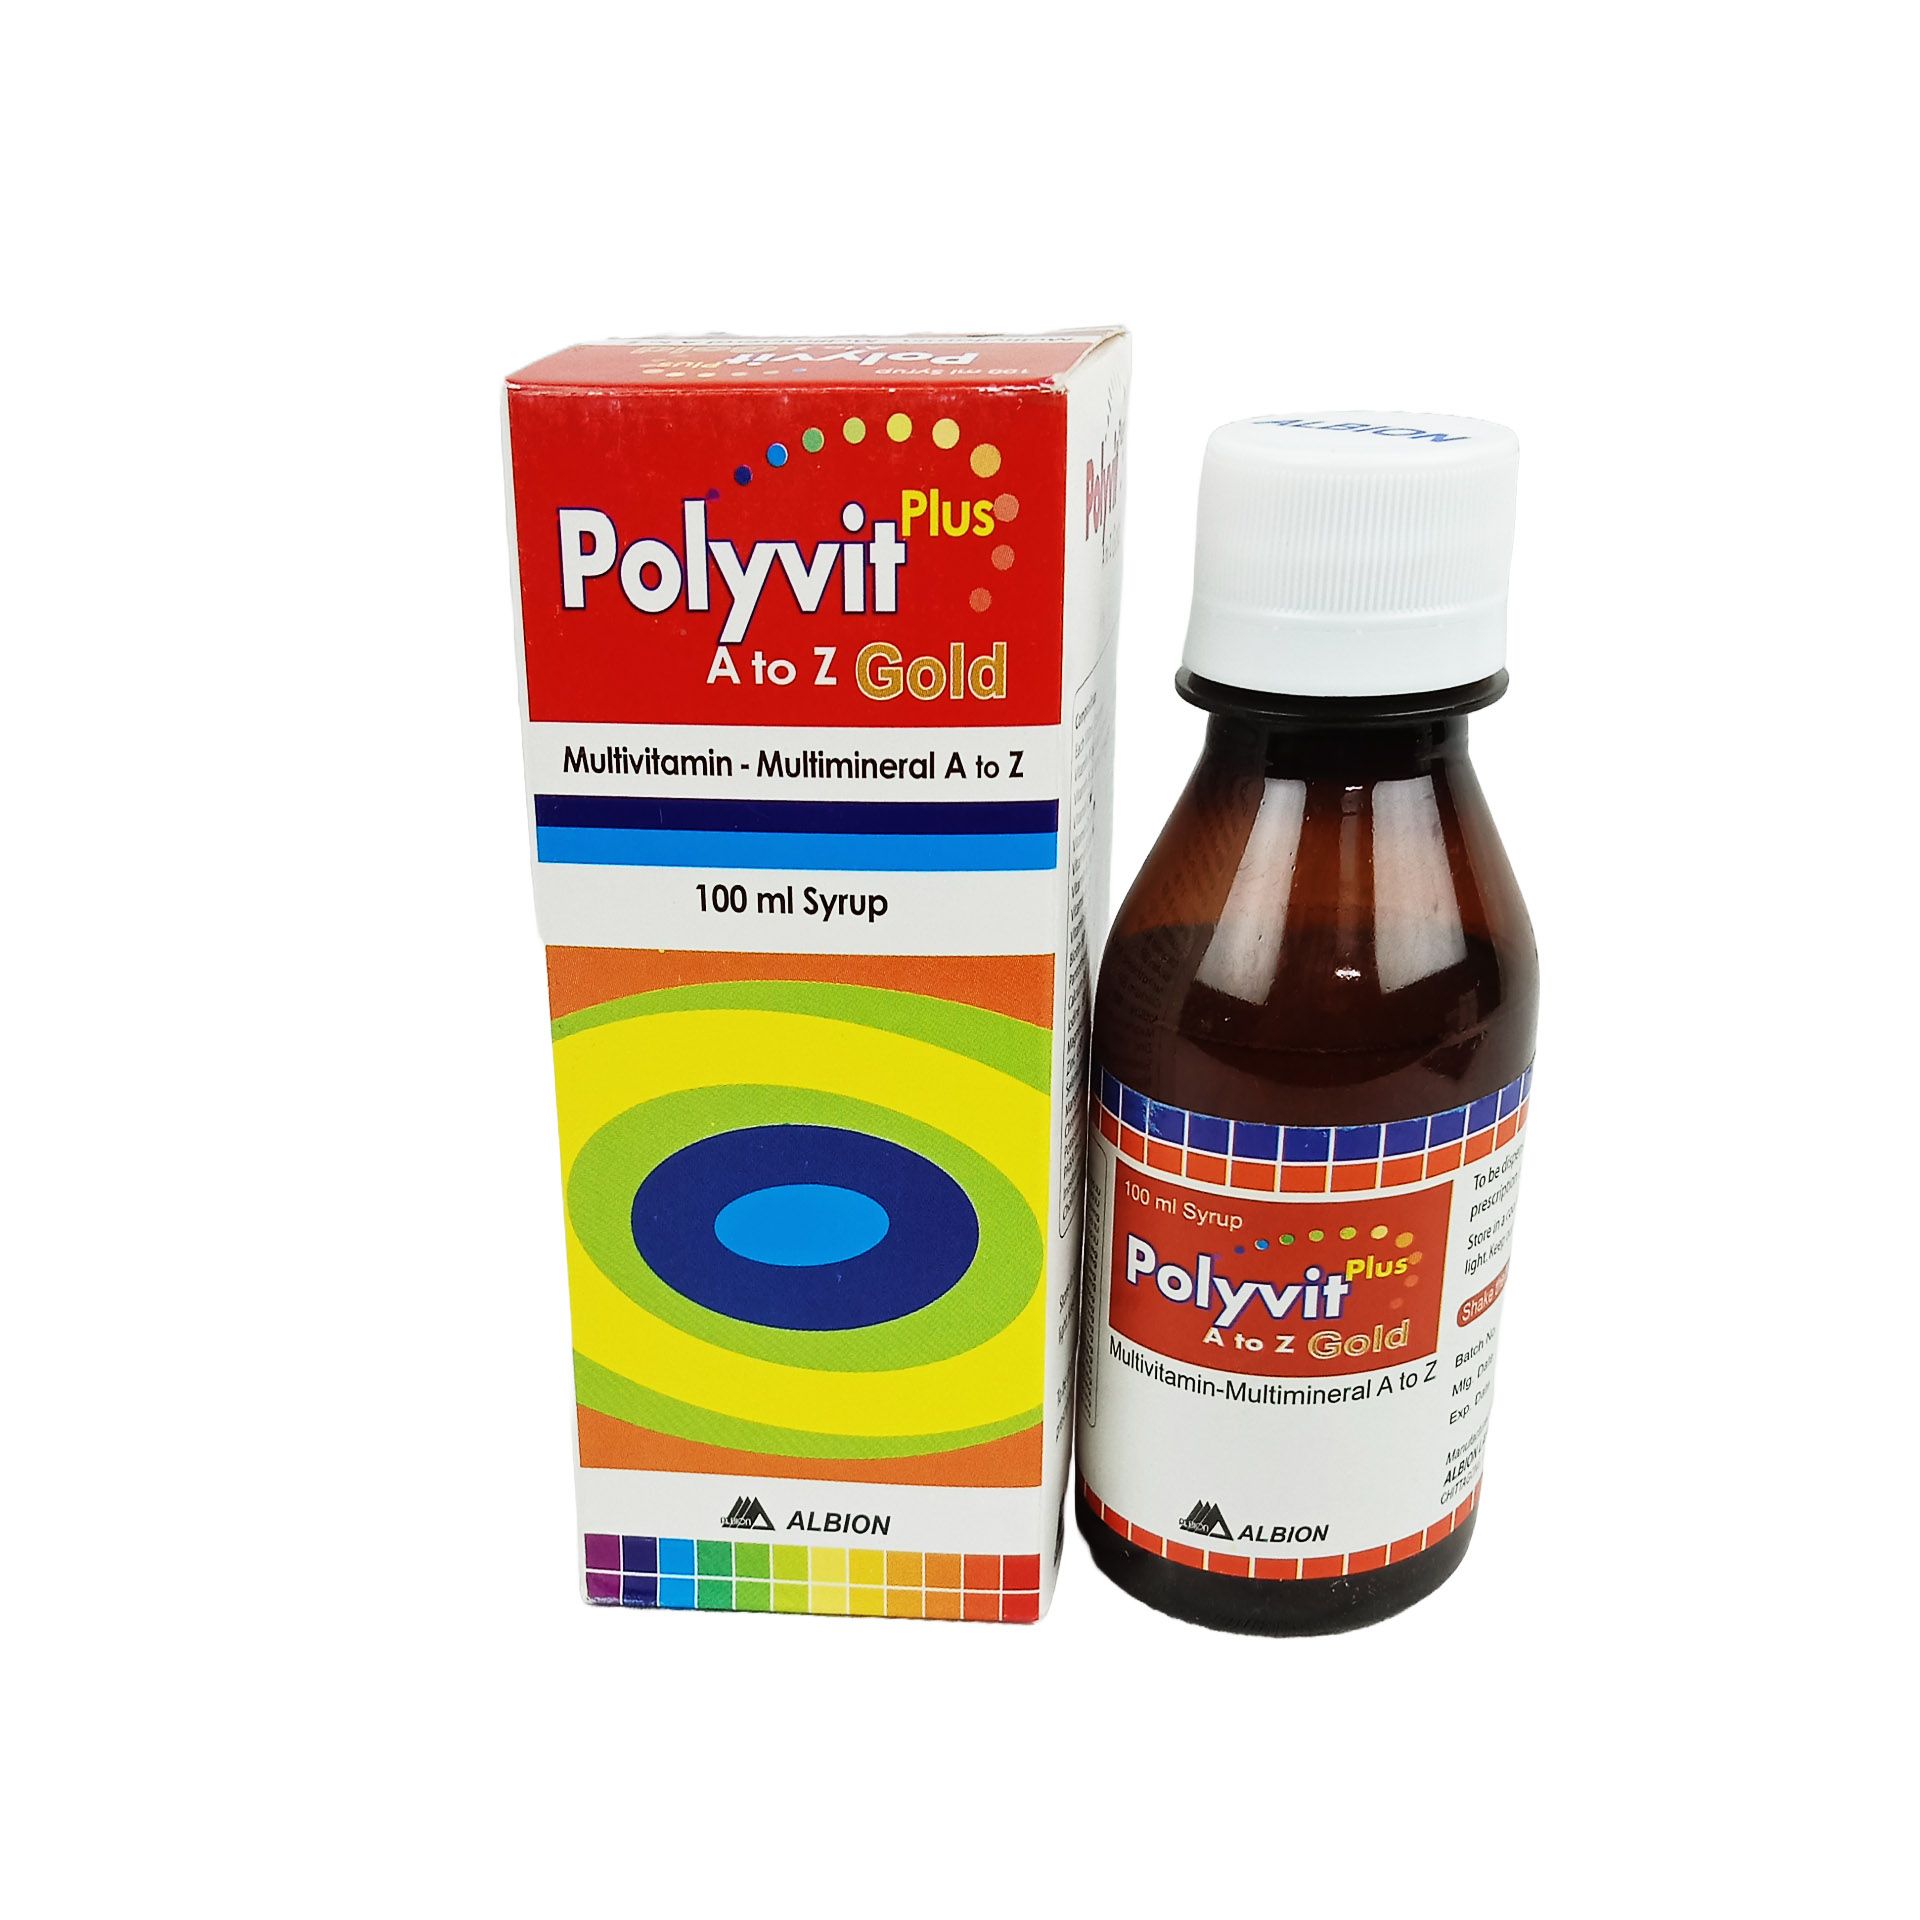 Polyvit Plus Gold(A To Z) 100ml Syrup